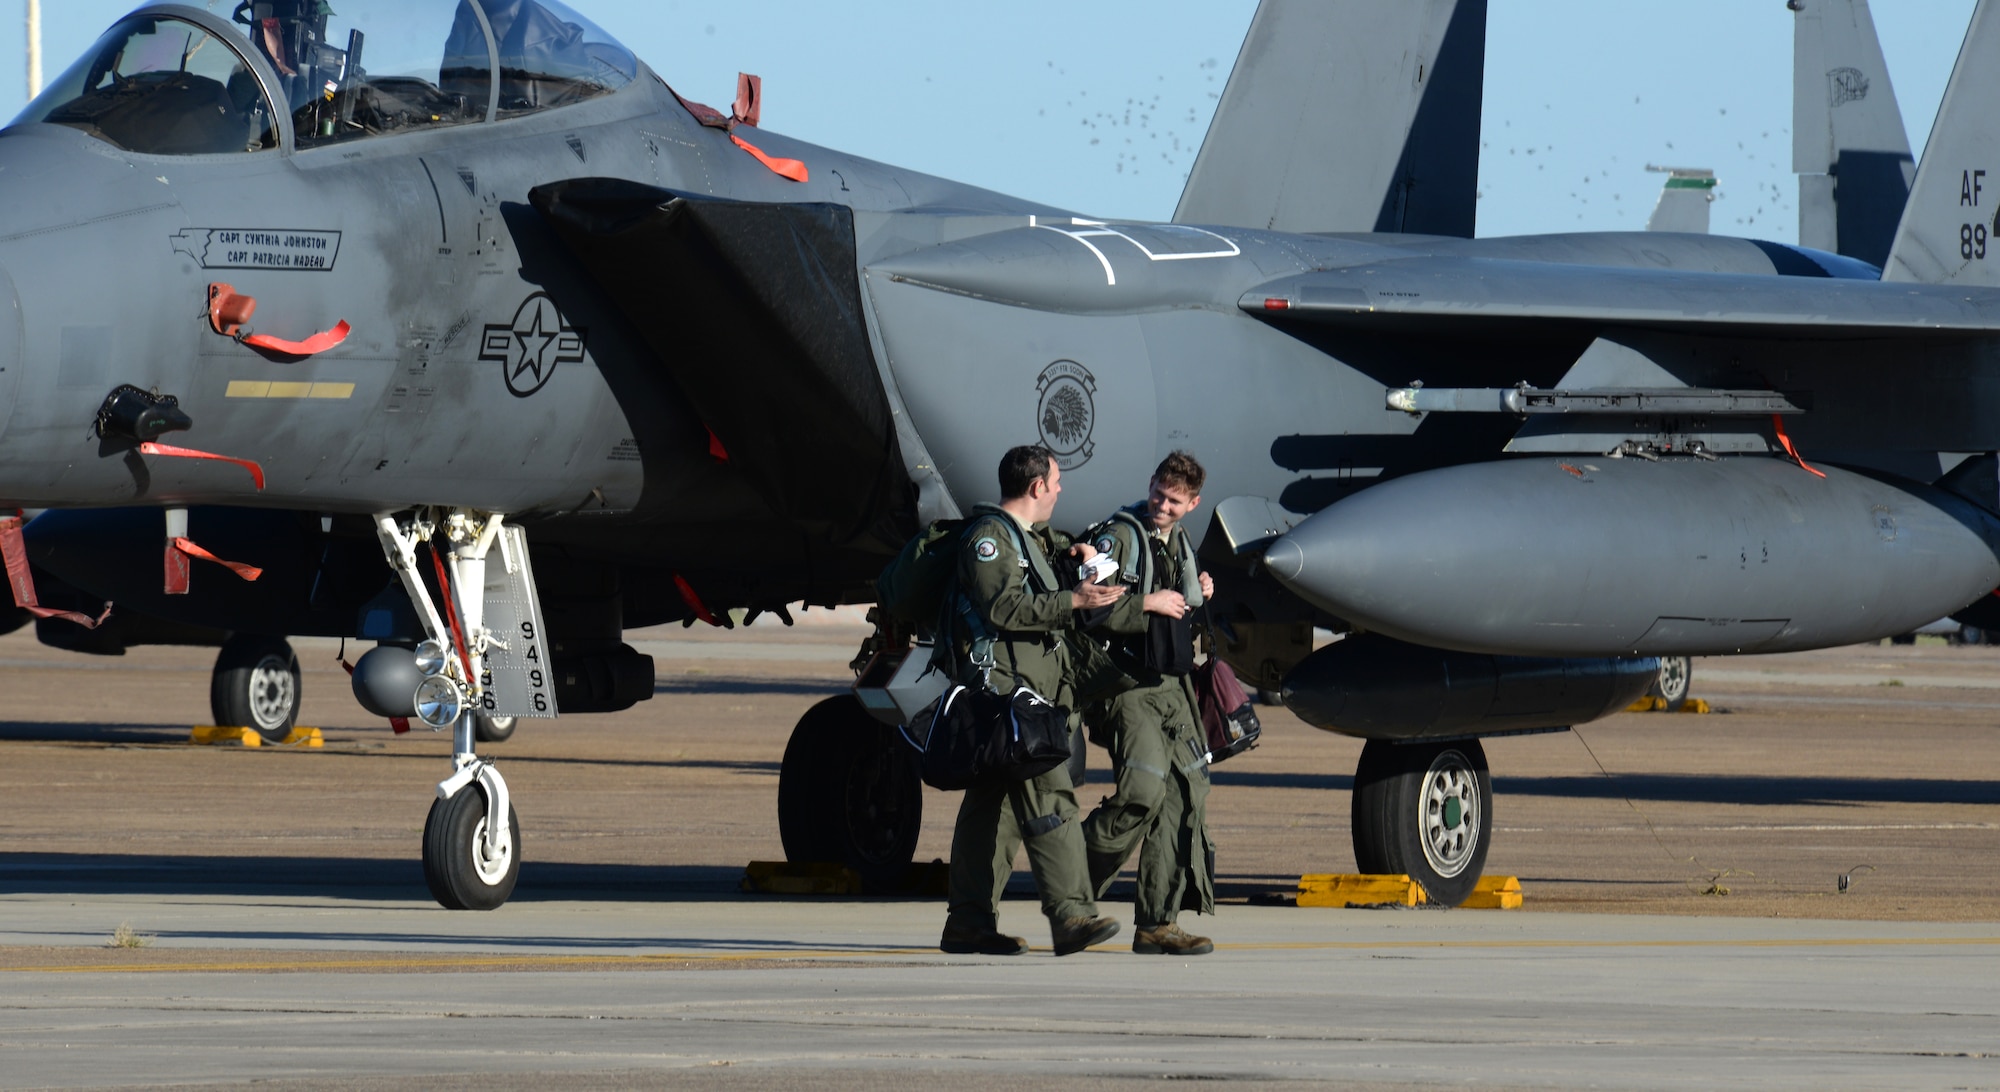 Aircrew depart an F-15E Strike Eagle at Barksdale Air Force Base, La., Oct. 1, 2015. Hundreds of aircrew and a large contingent of aircraft including Strike Eagles and KC-135 Stratotankers flew in from Seymour Johnson AFB, N.C., to avoid potential damage from high winds associated with Hurricane Joaquin, a Category 4 storm with winds up to 130 mph. (U.S. Air Force photo/Airman 1st Class Curt Beach)